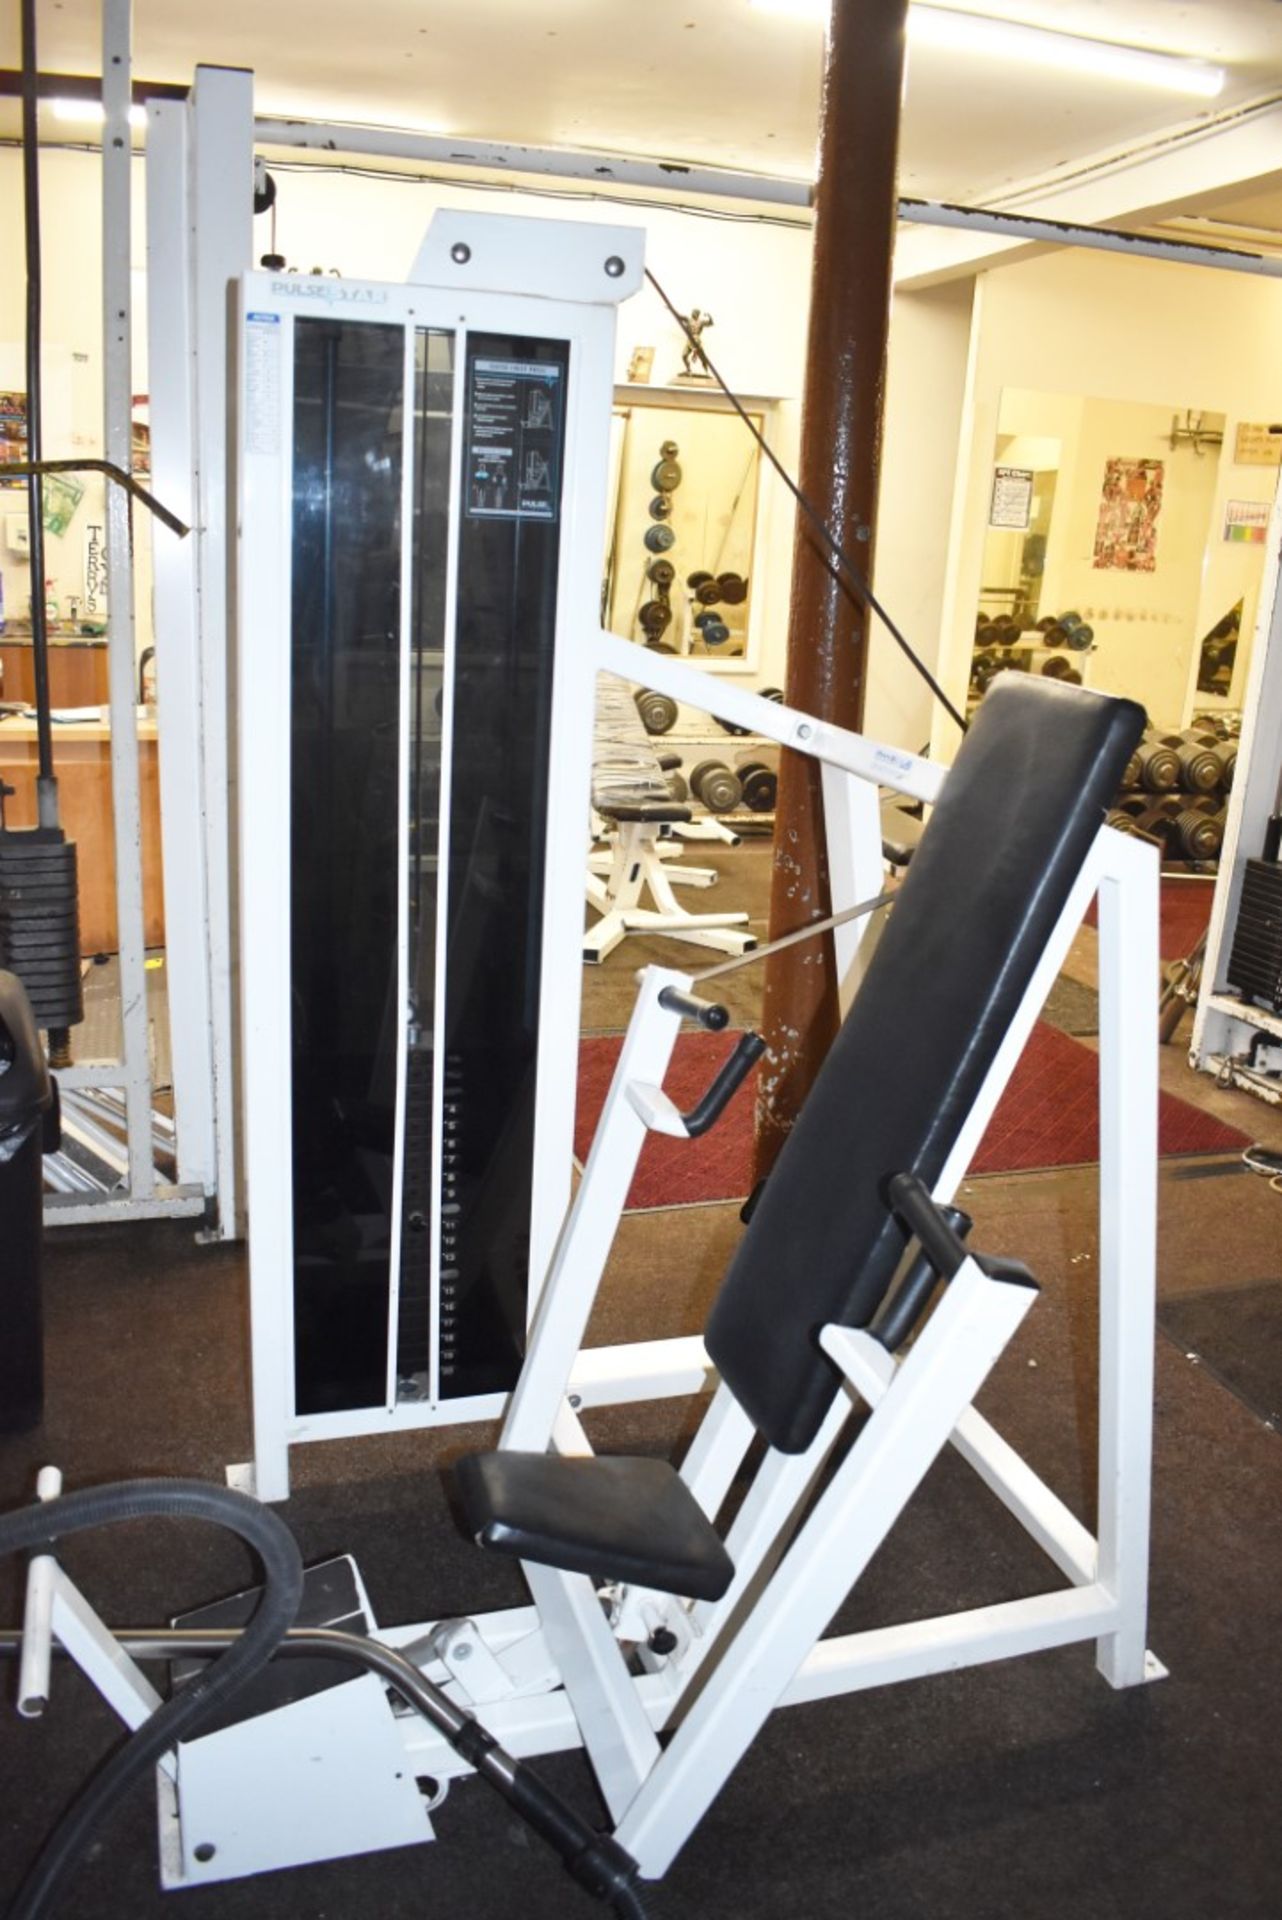 Contents of Bodybuilding and Strongman Gym - Includes Approx 30 Pieces of Gym Equipment, Floor Mats, - Image 11 of 95